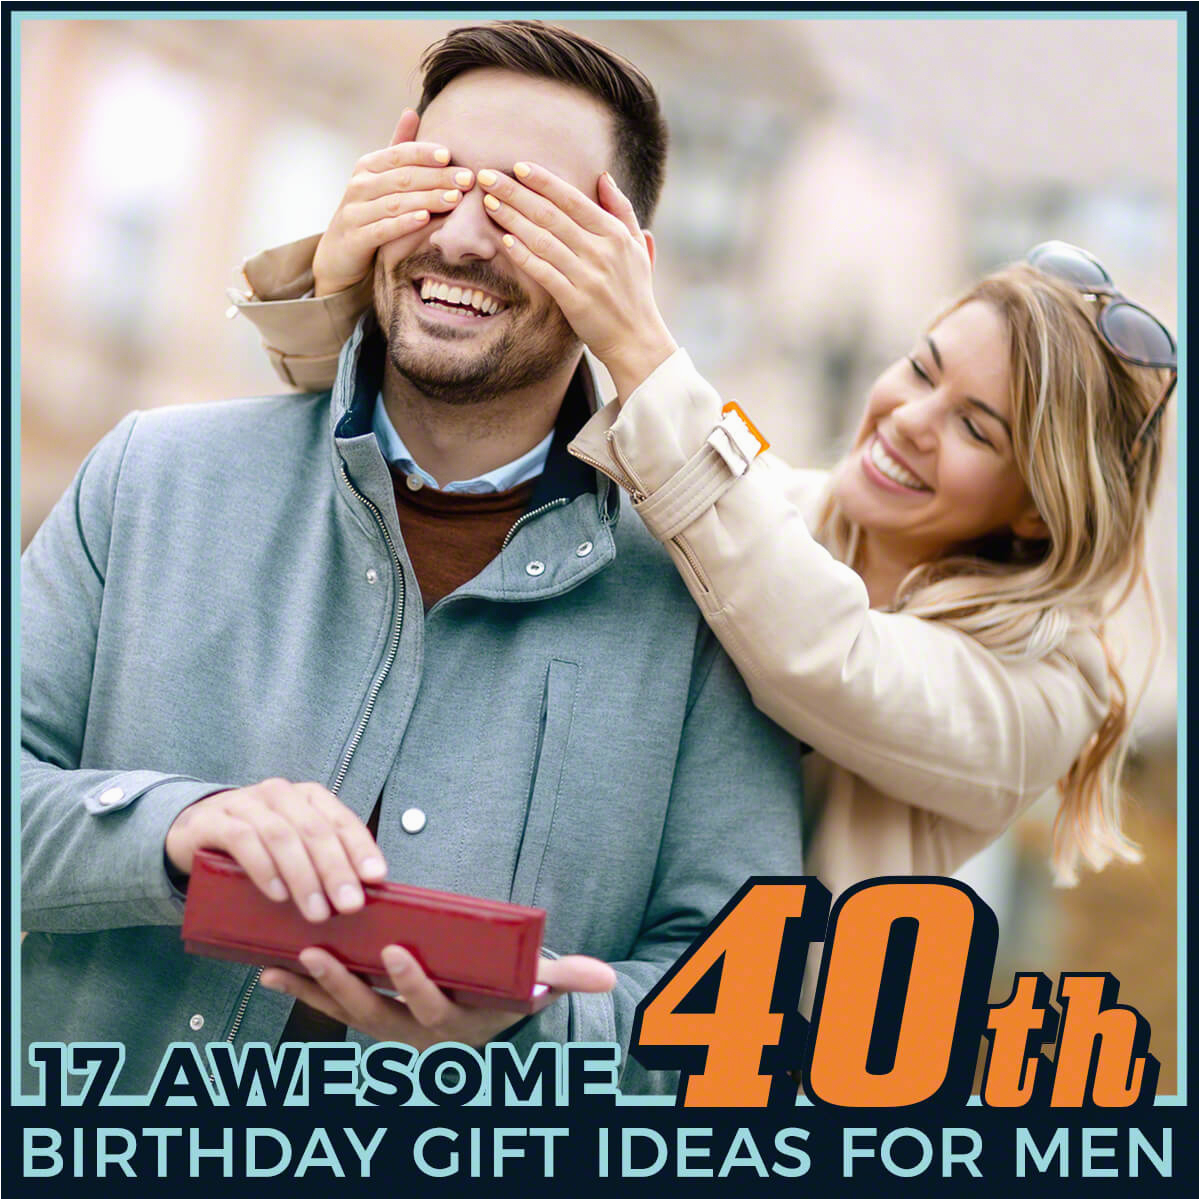 Birthday Gift for Male Friend Online 17 Awesome 40th Birthday Gift Ideas for Men